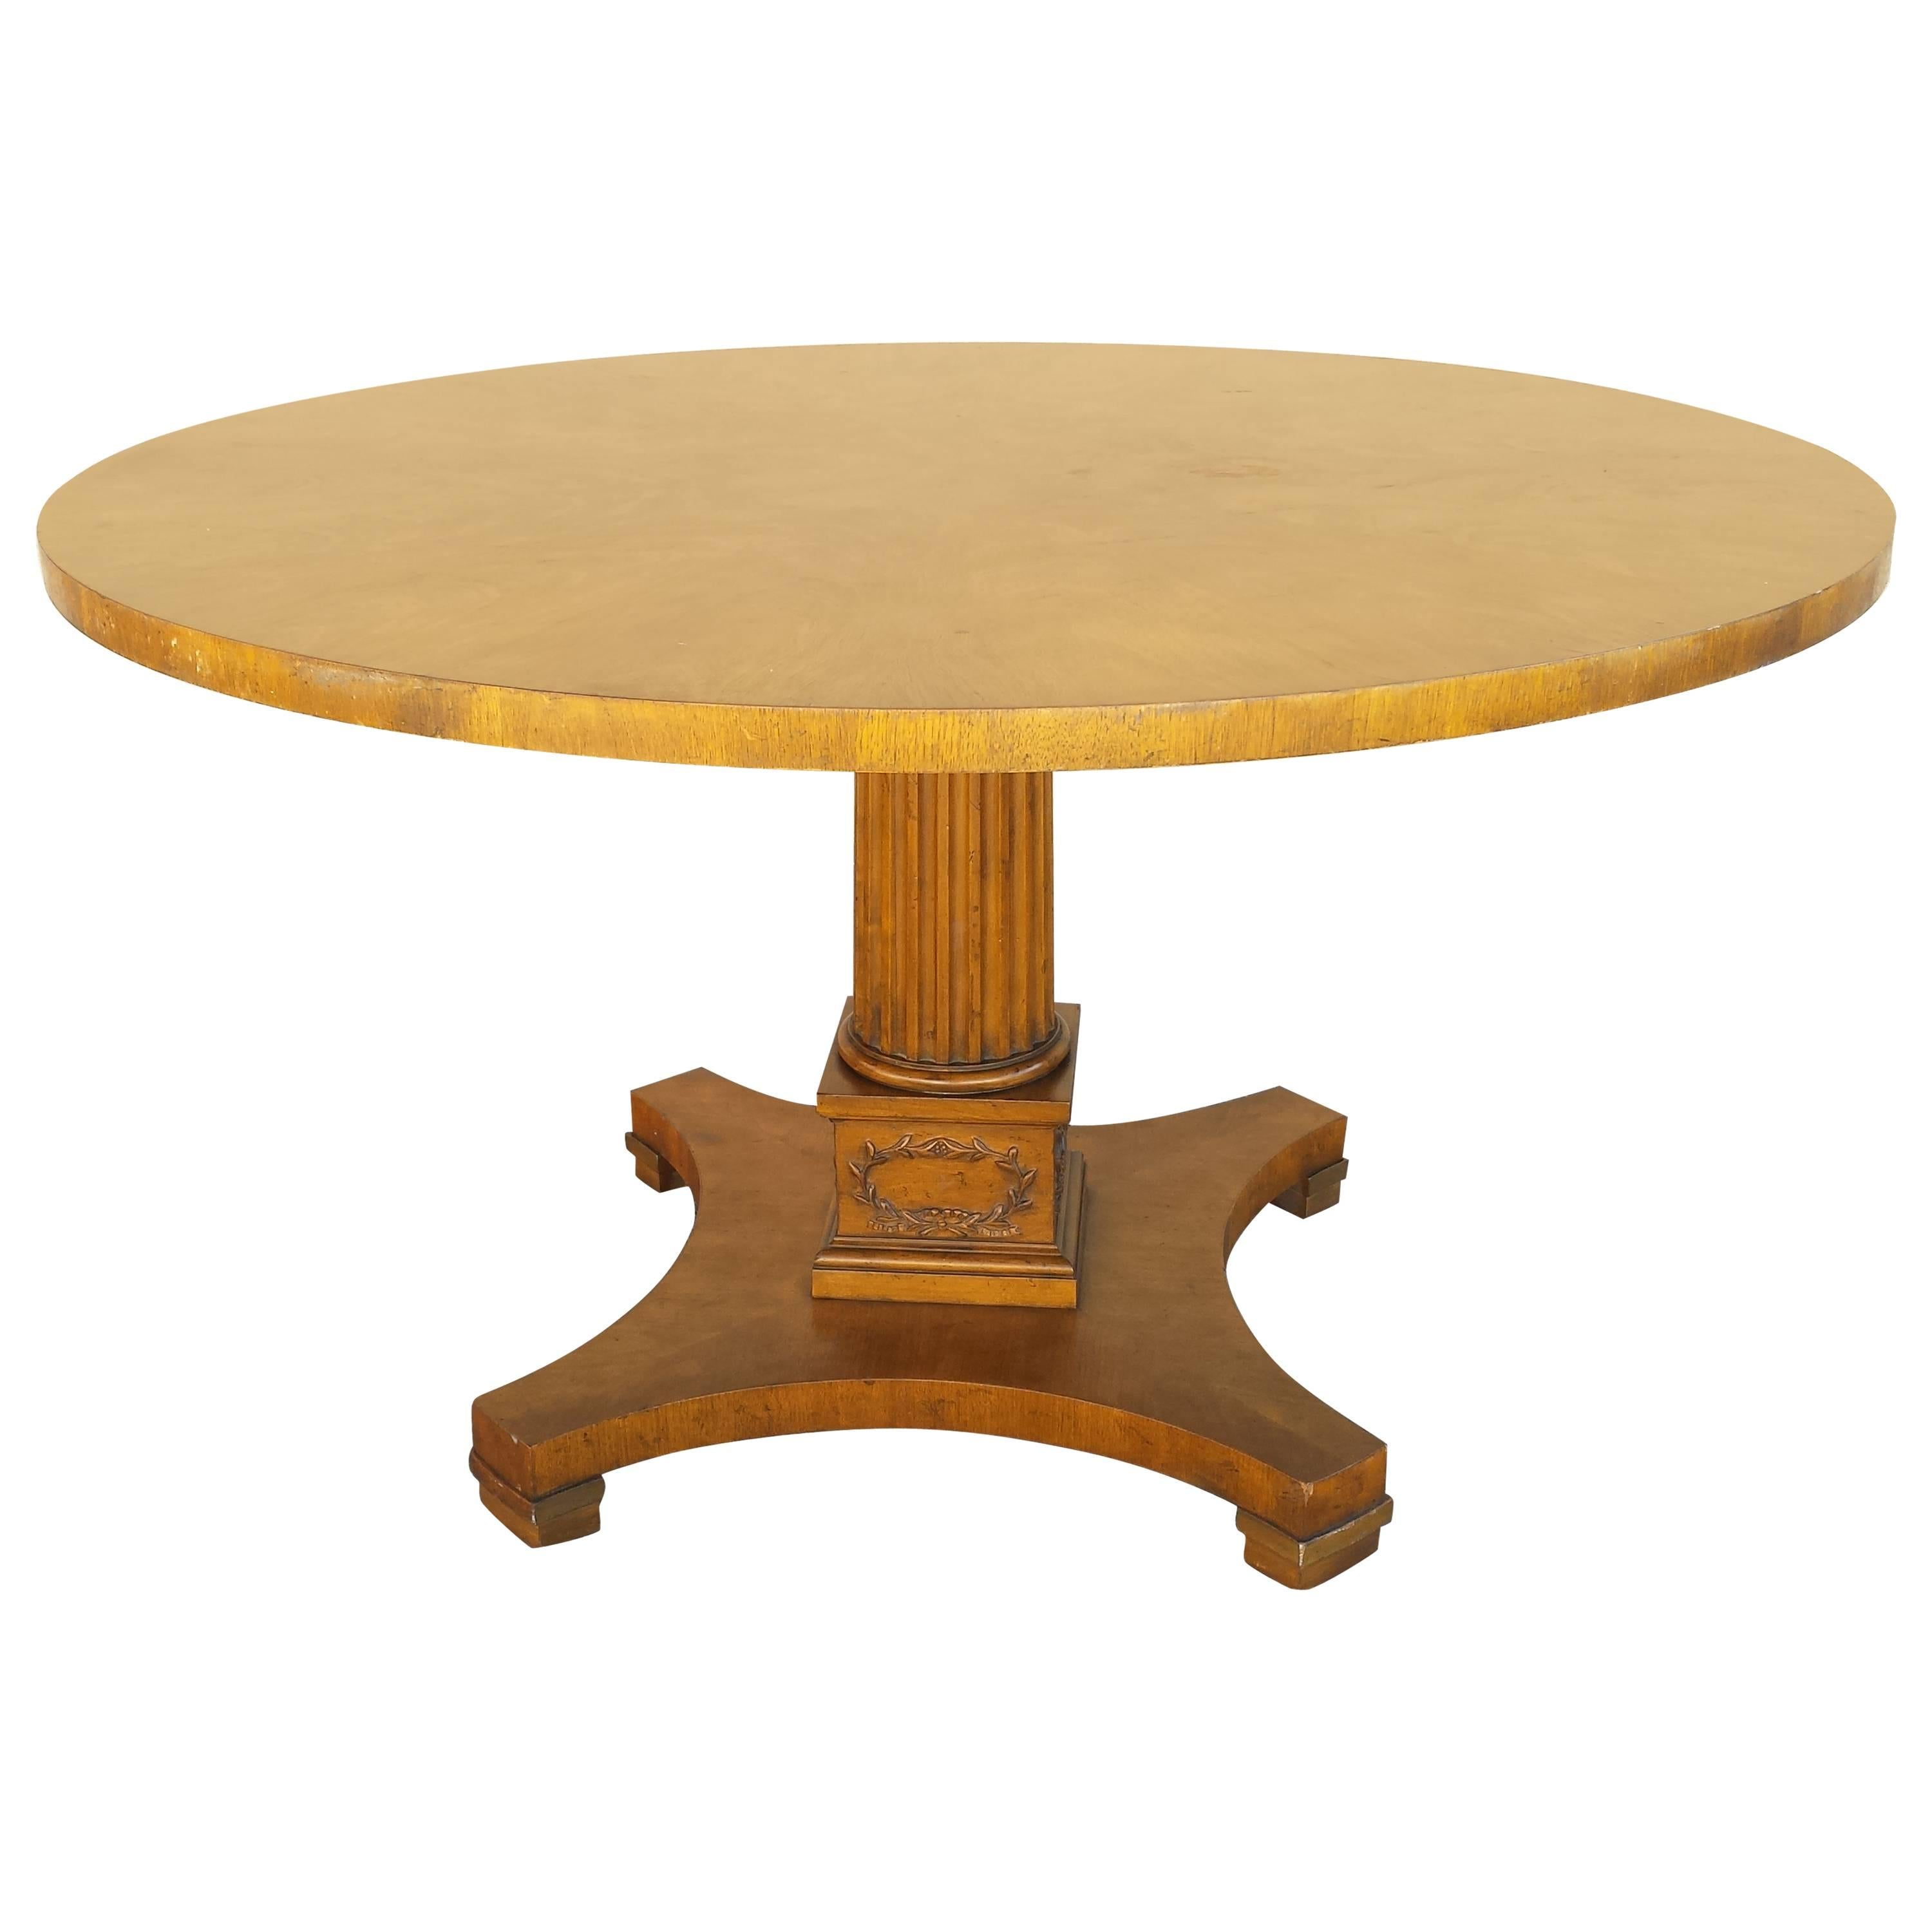 Center Table, Art Deco Midcentury Style Cocktails Table Burl Wood by Bake For Sale